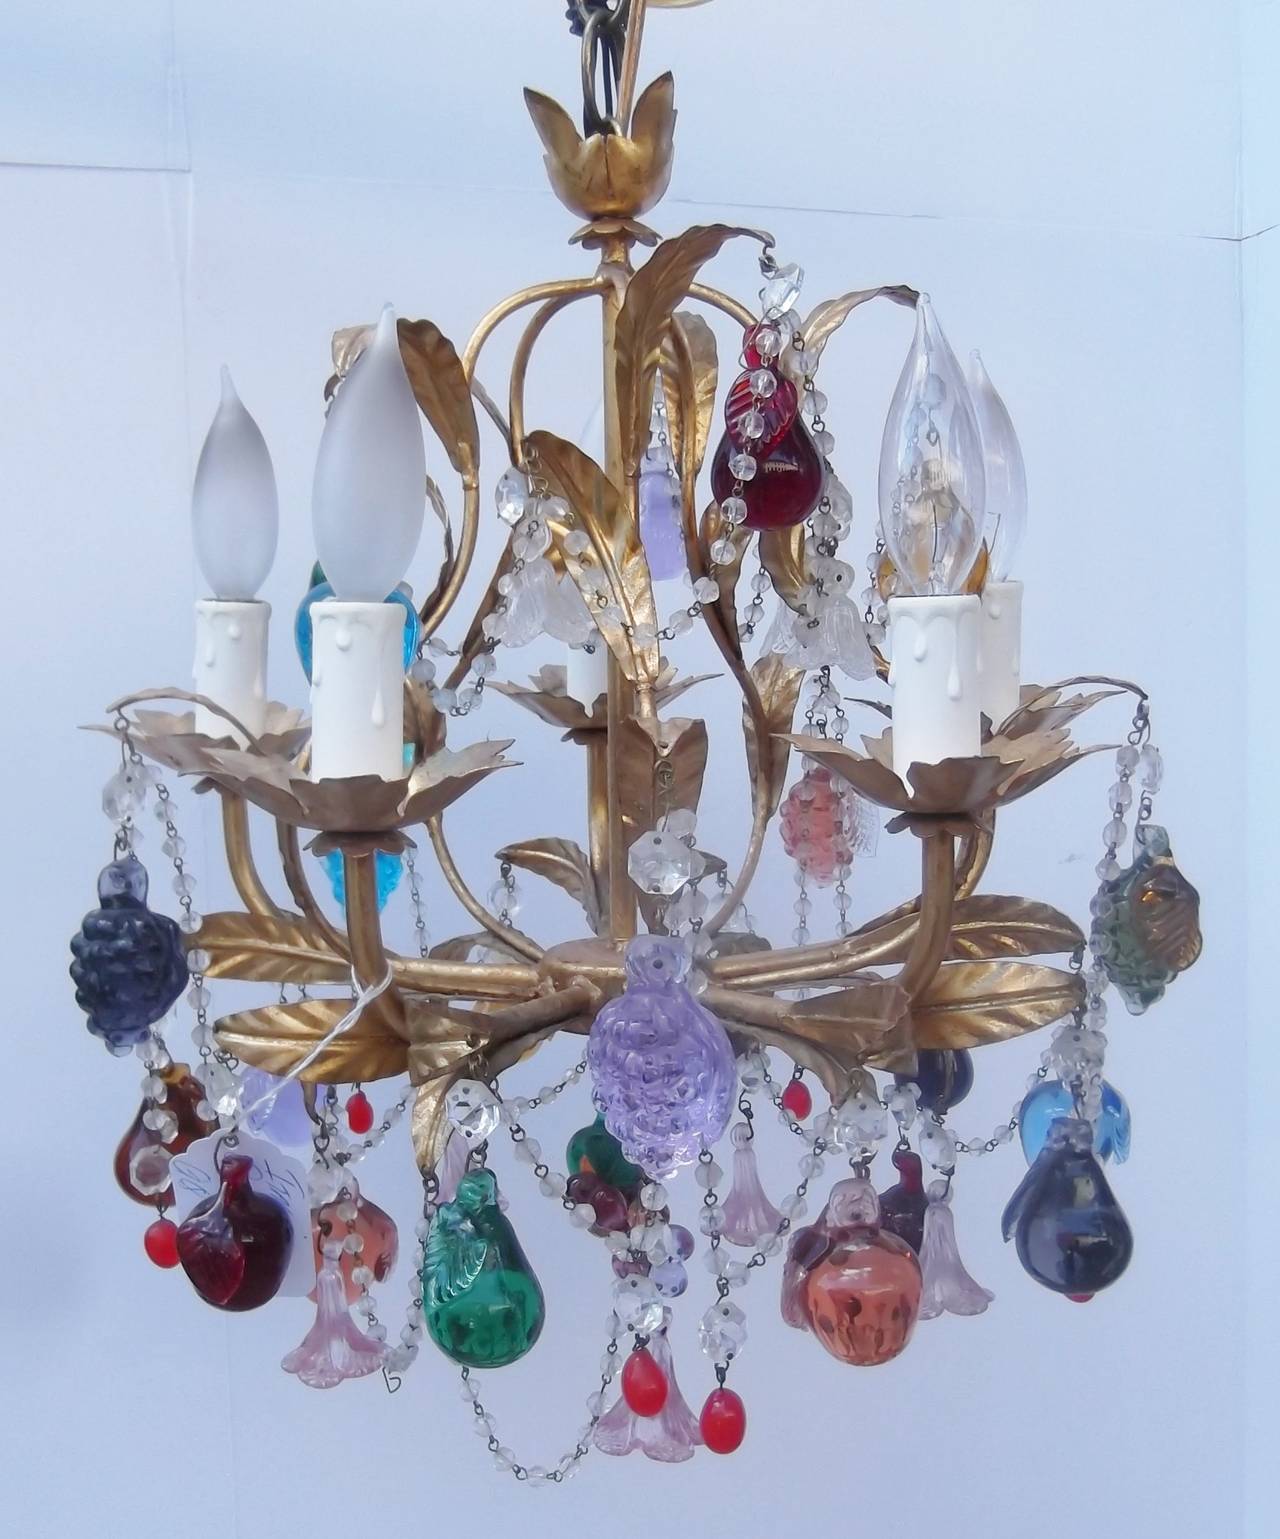 Playful and colorful Italian chandelier with multi colored hand crafted Italian glass fruit and faceted glass beading.  The gilt metal frame is adorned with leaf decoration supported by a center bar. This chandelier is an unusual alternative to the